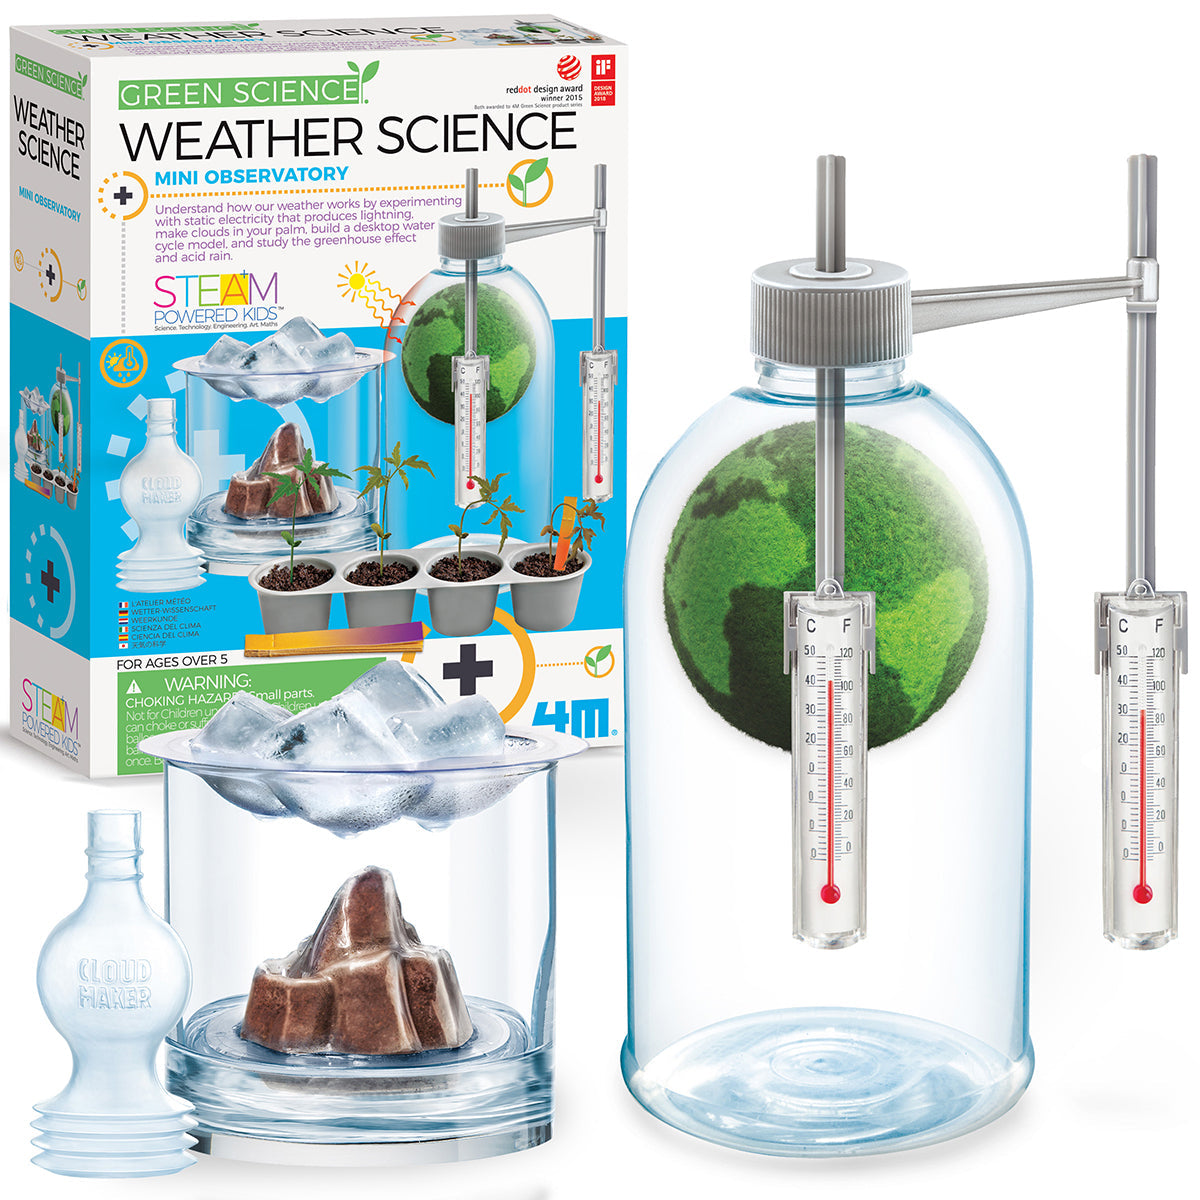 Green Science Weather Science